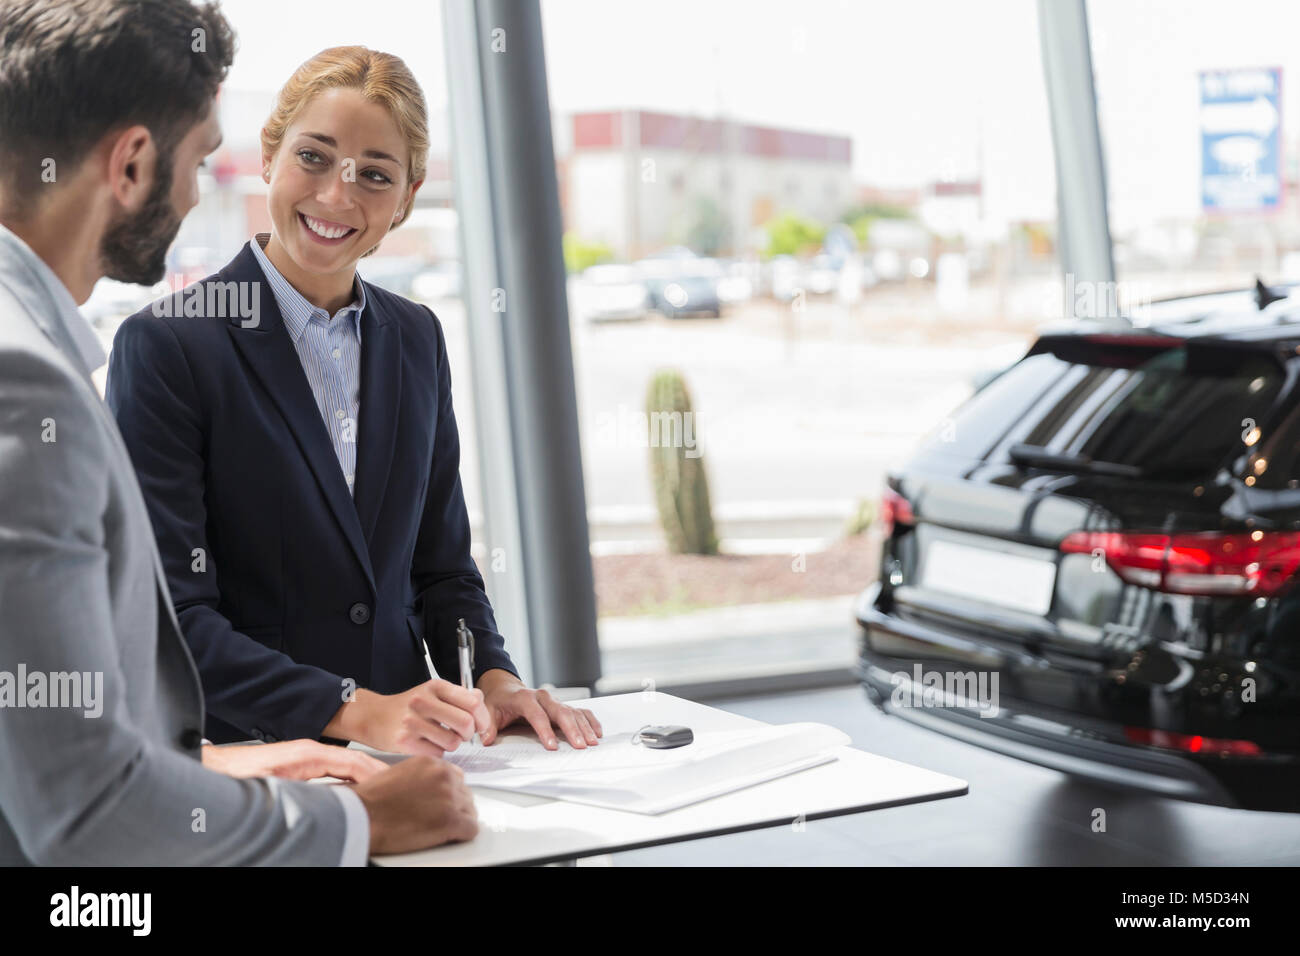 Car saleswoman and male customer signing contract paperwork in car dealership showroom Stock Photo